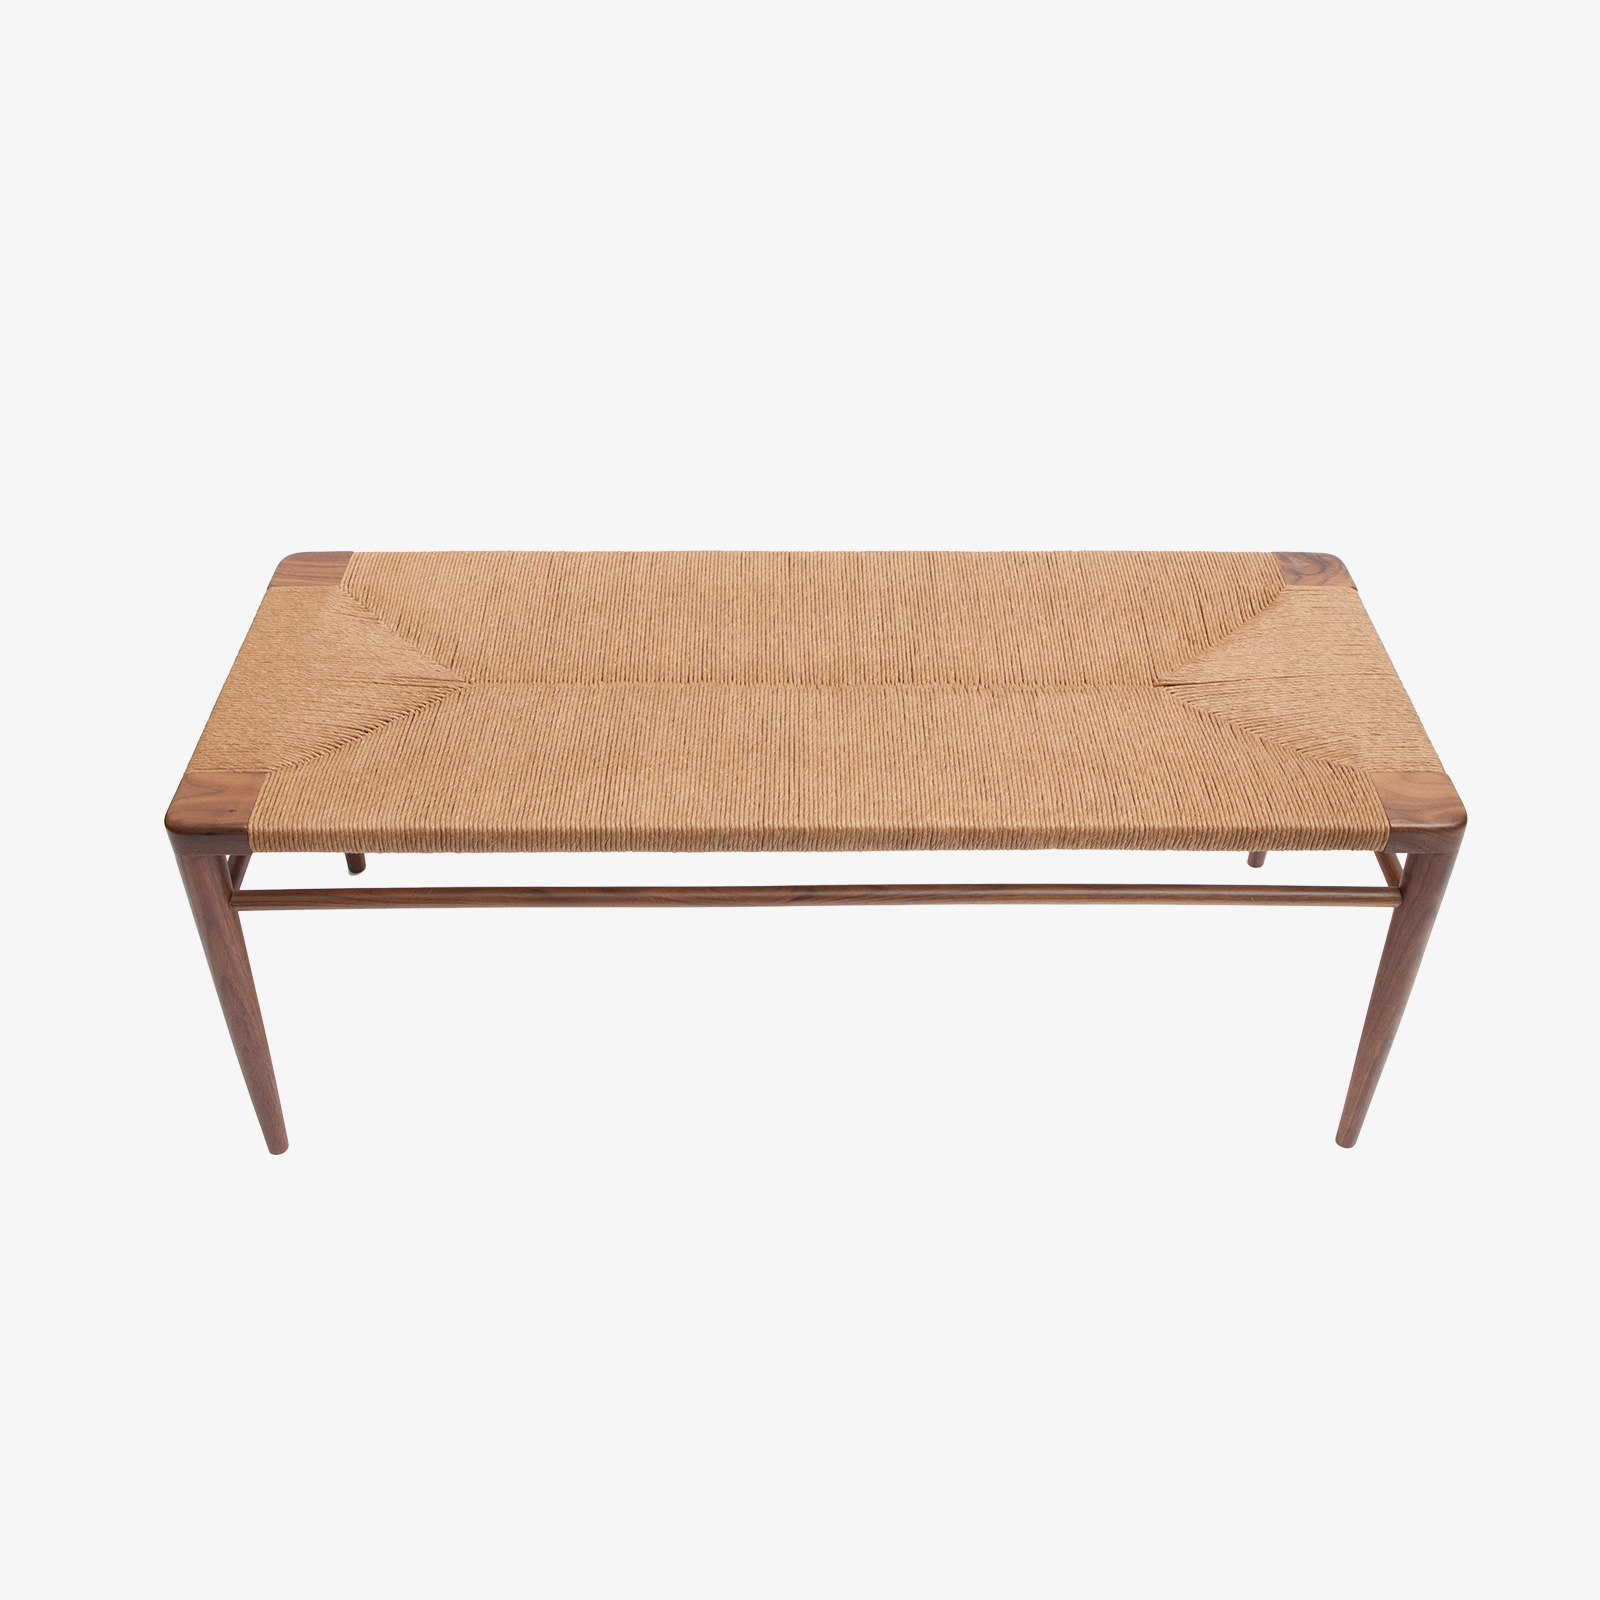 Hand Woven Rush And Walnut Bench By Smilow Furniture 44 60 Regeneration